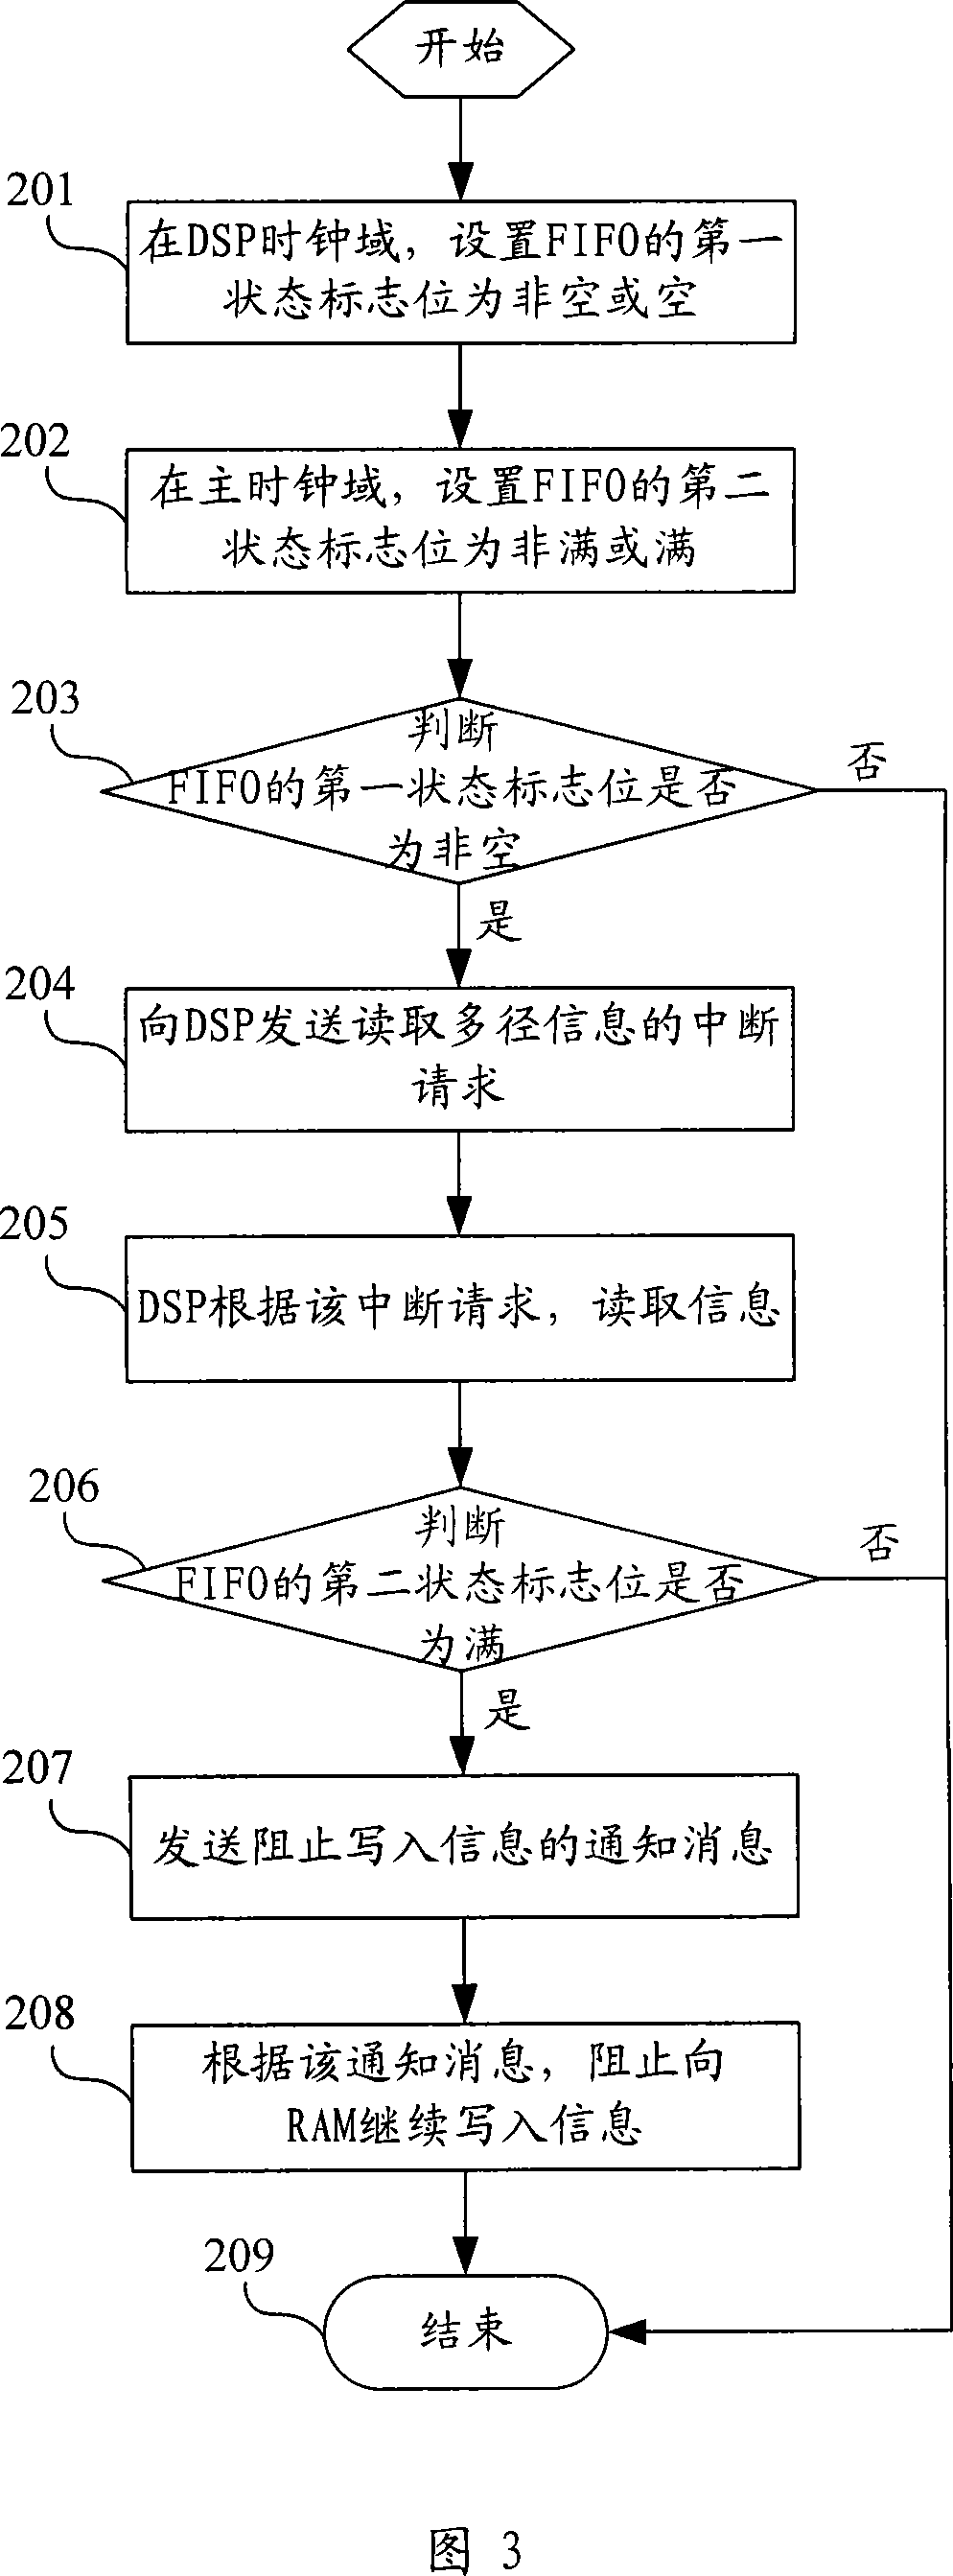 Method and apparatus for reporting information